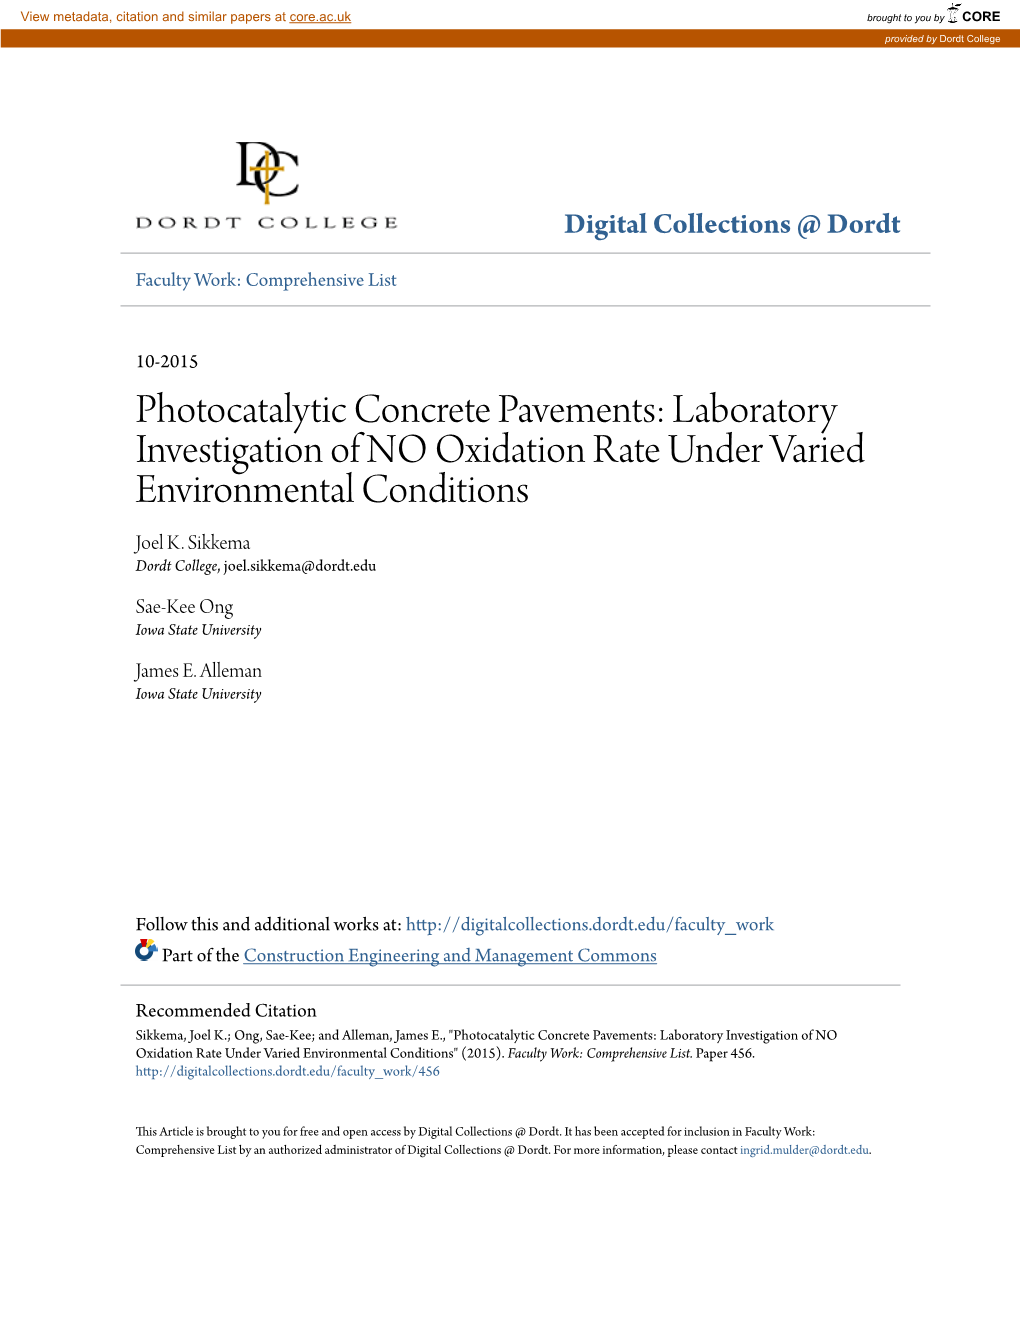 Photocatalytic Concrete Pavements: Laboratory Investigation of NO Oxidation Rate Under Varied Environmental Conditions Joel K